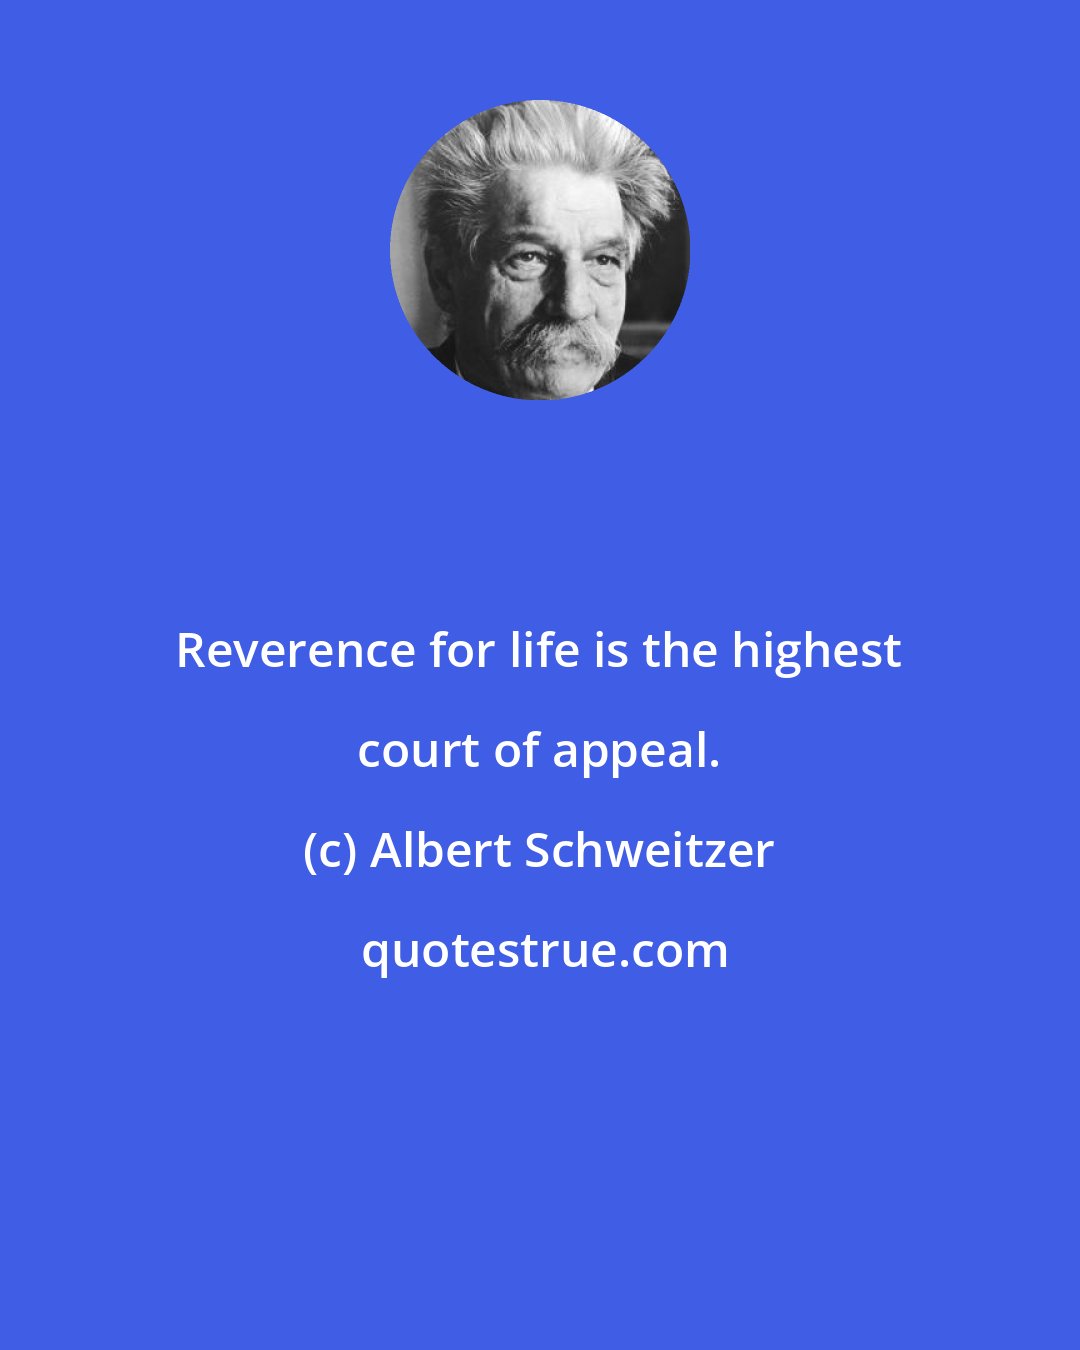 Albert Schweitzer: Reverence for life is the highest court of appeal.